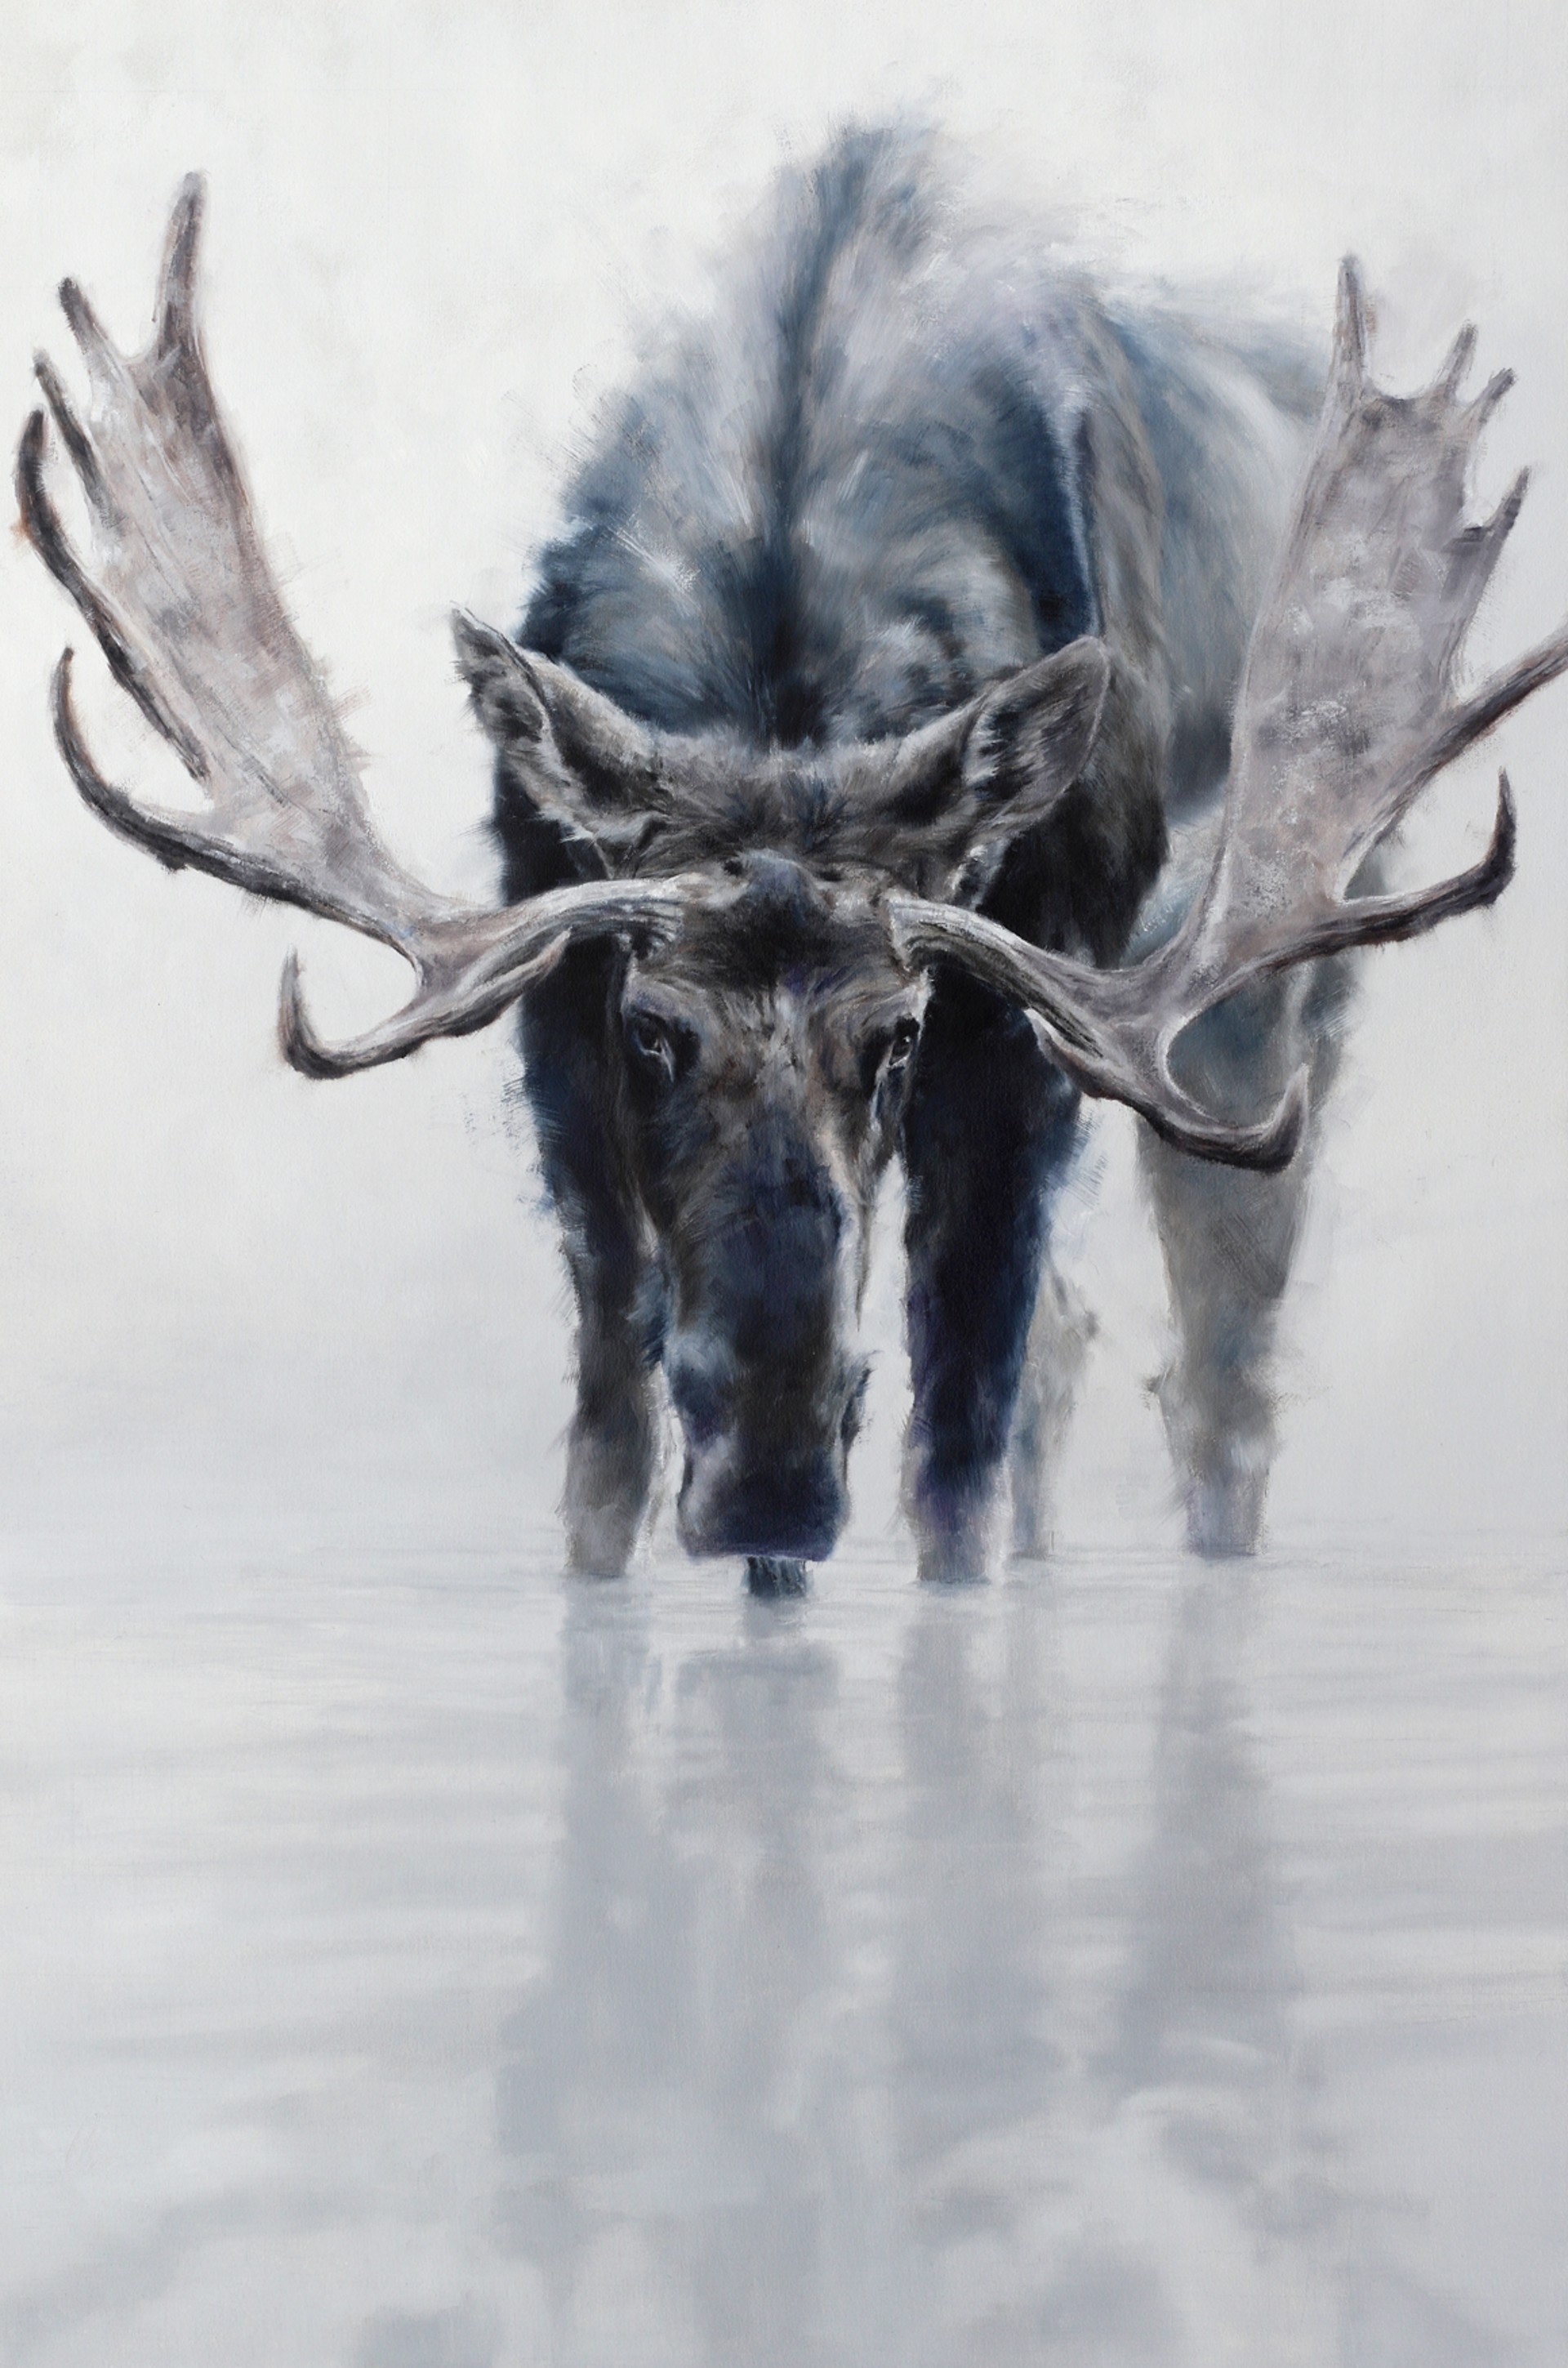 Original Contemporary Oil Painting Of A Bull Moose Standing IN Water With His Reflection  In Front Of Him, By Doyle Hostetler